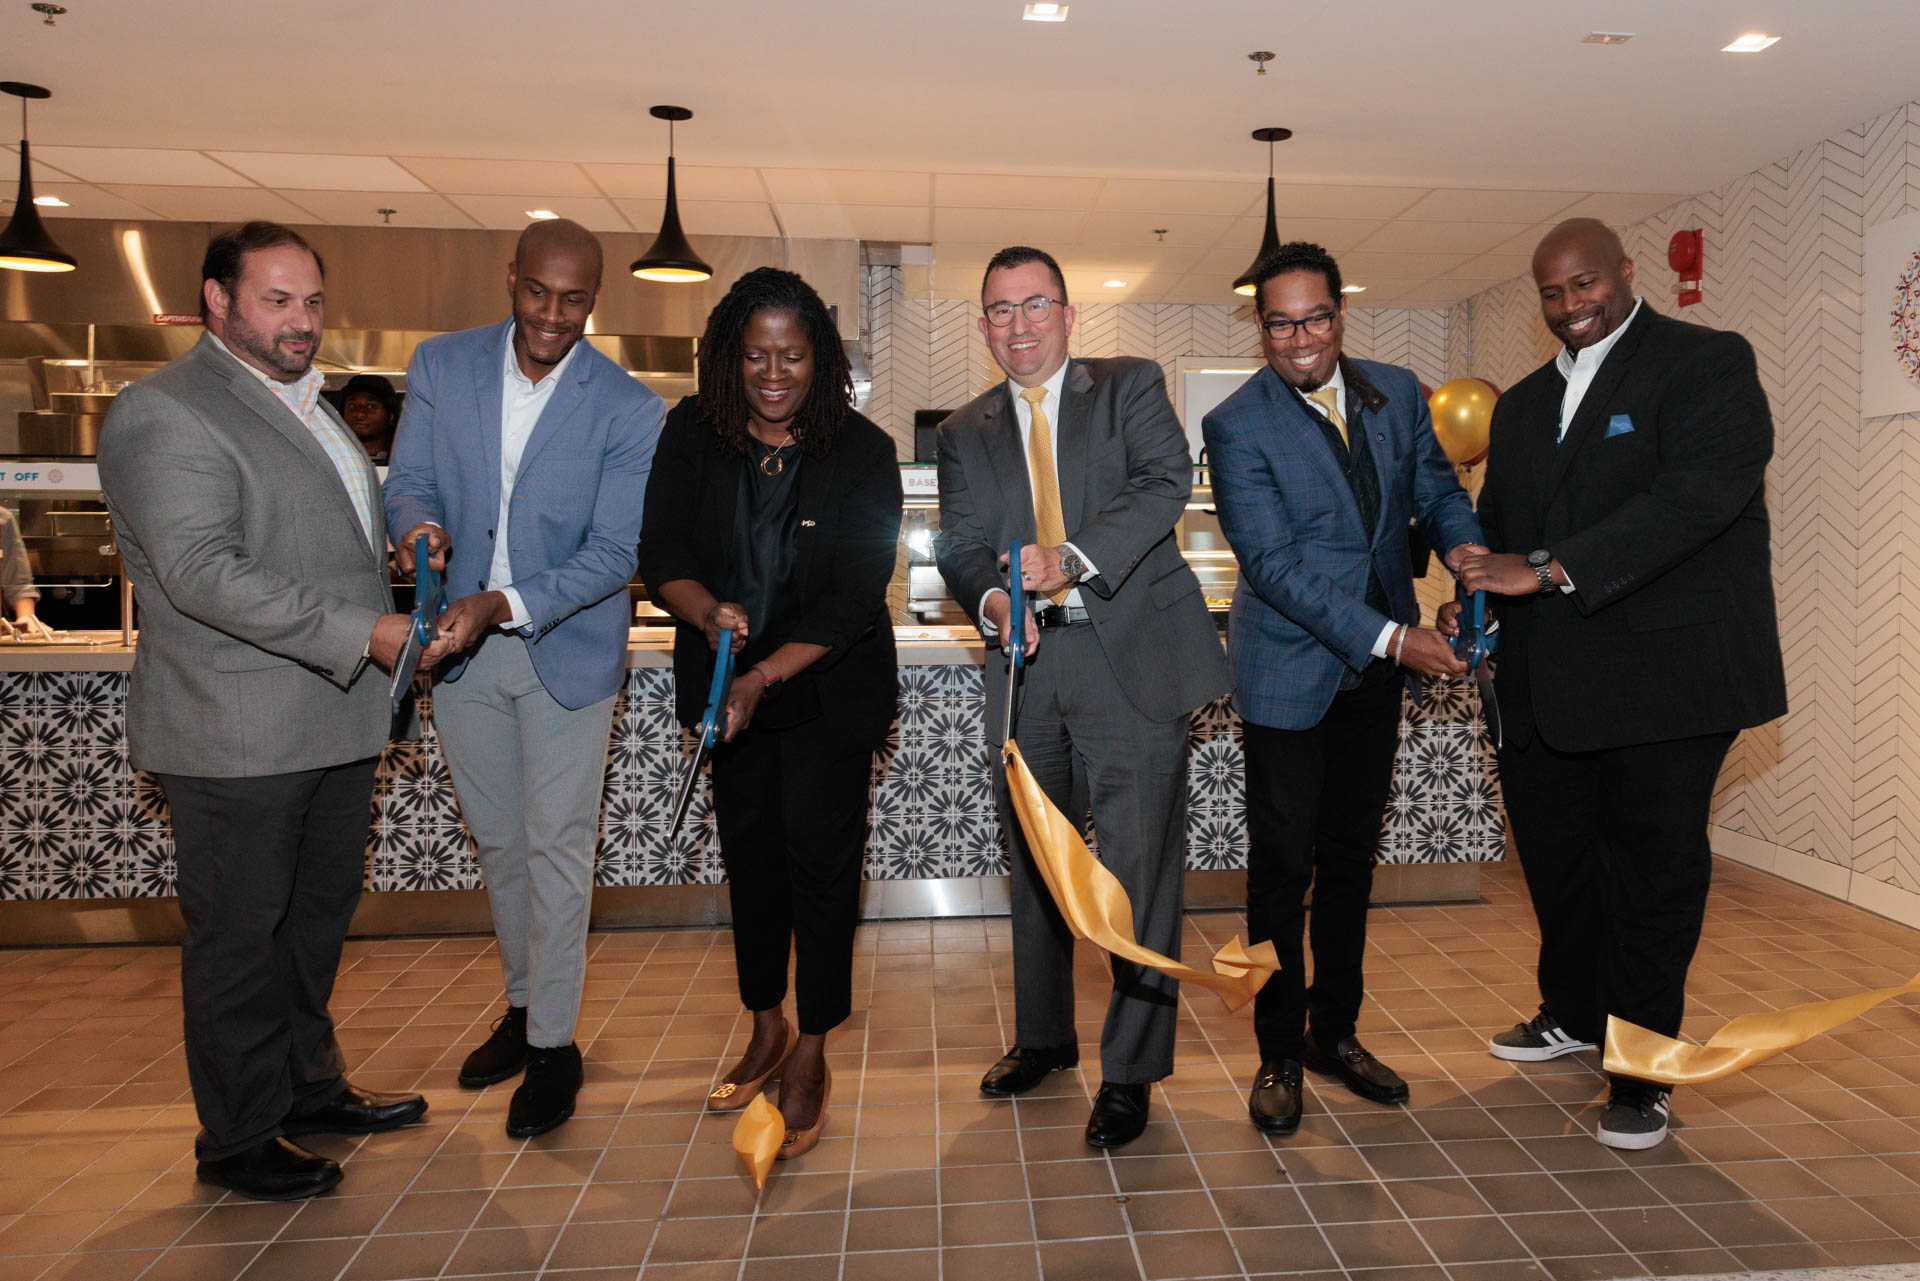 Six members of the GW community cut a ribbon to open Chaat House